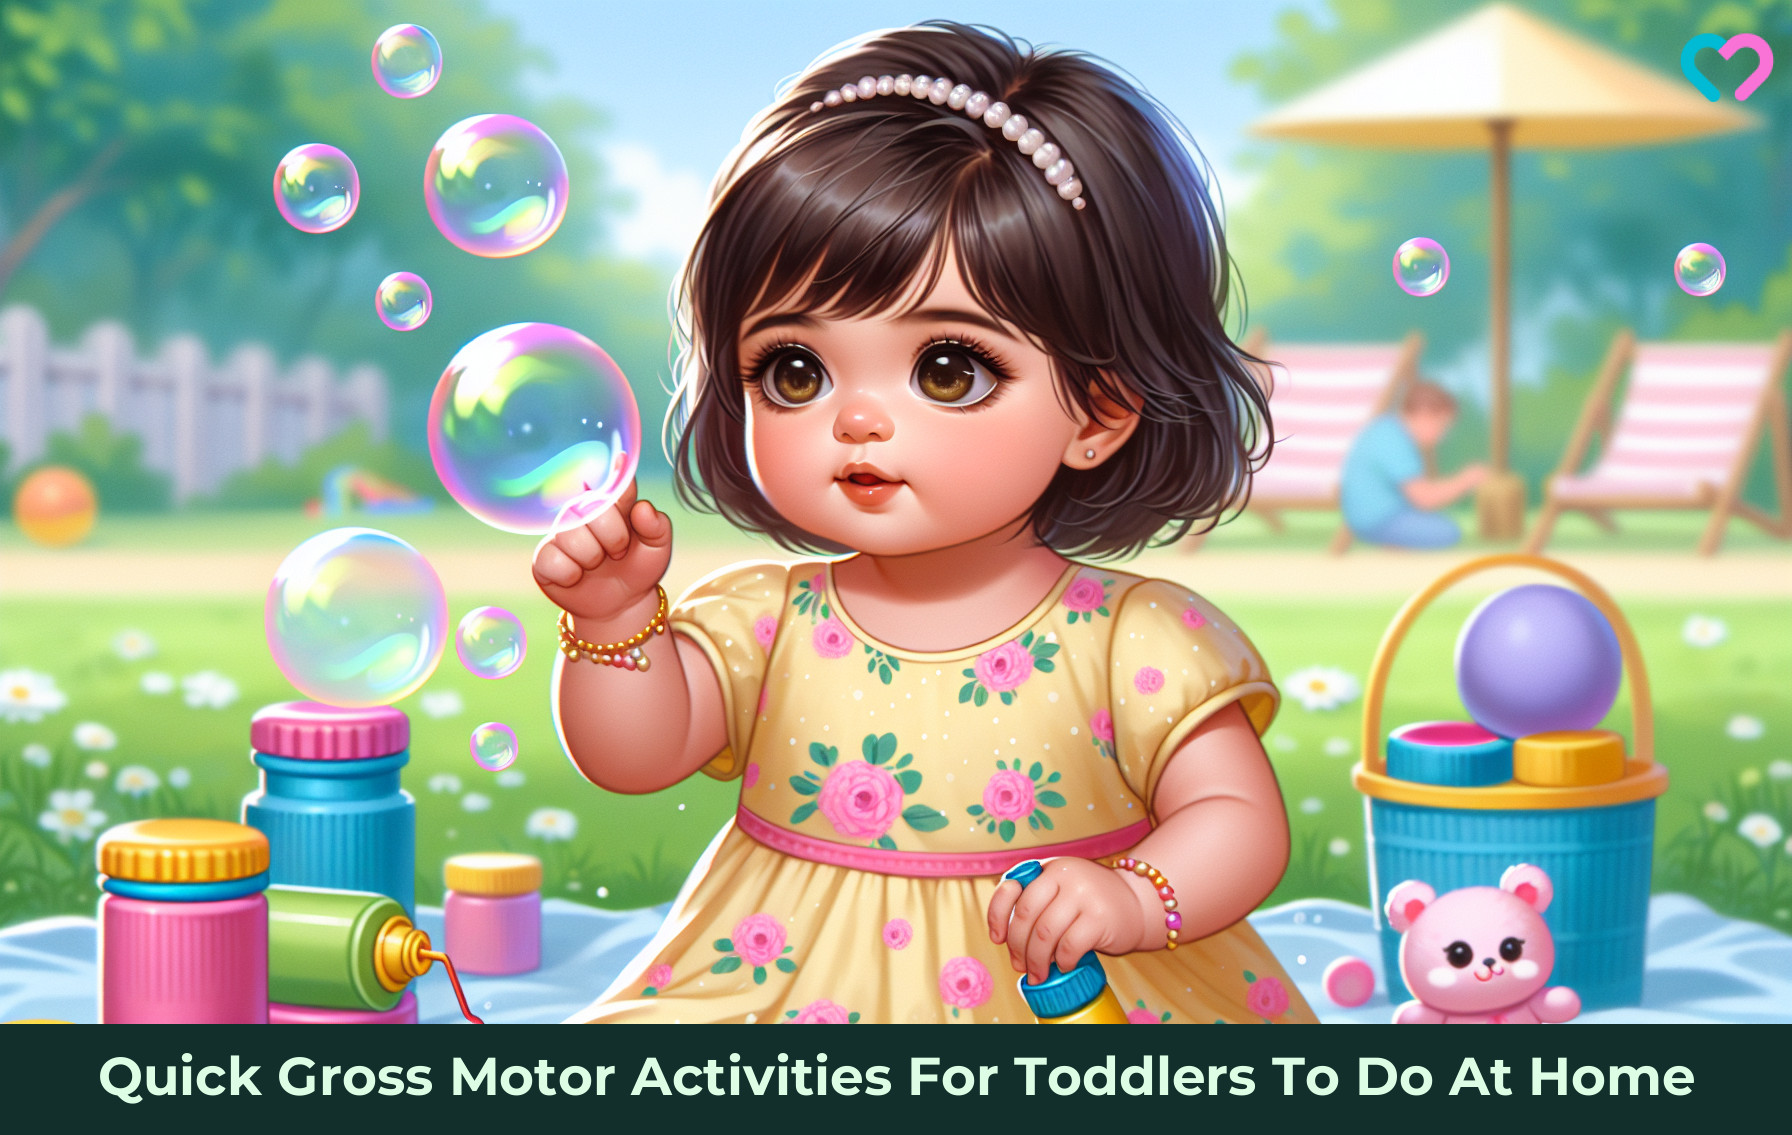 Gross Motor Activities For Toddlers_illustration